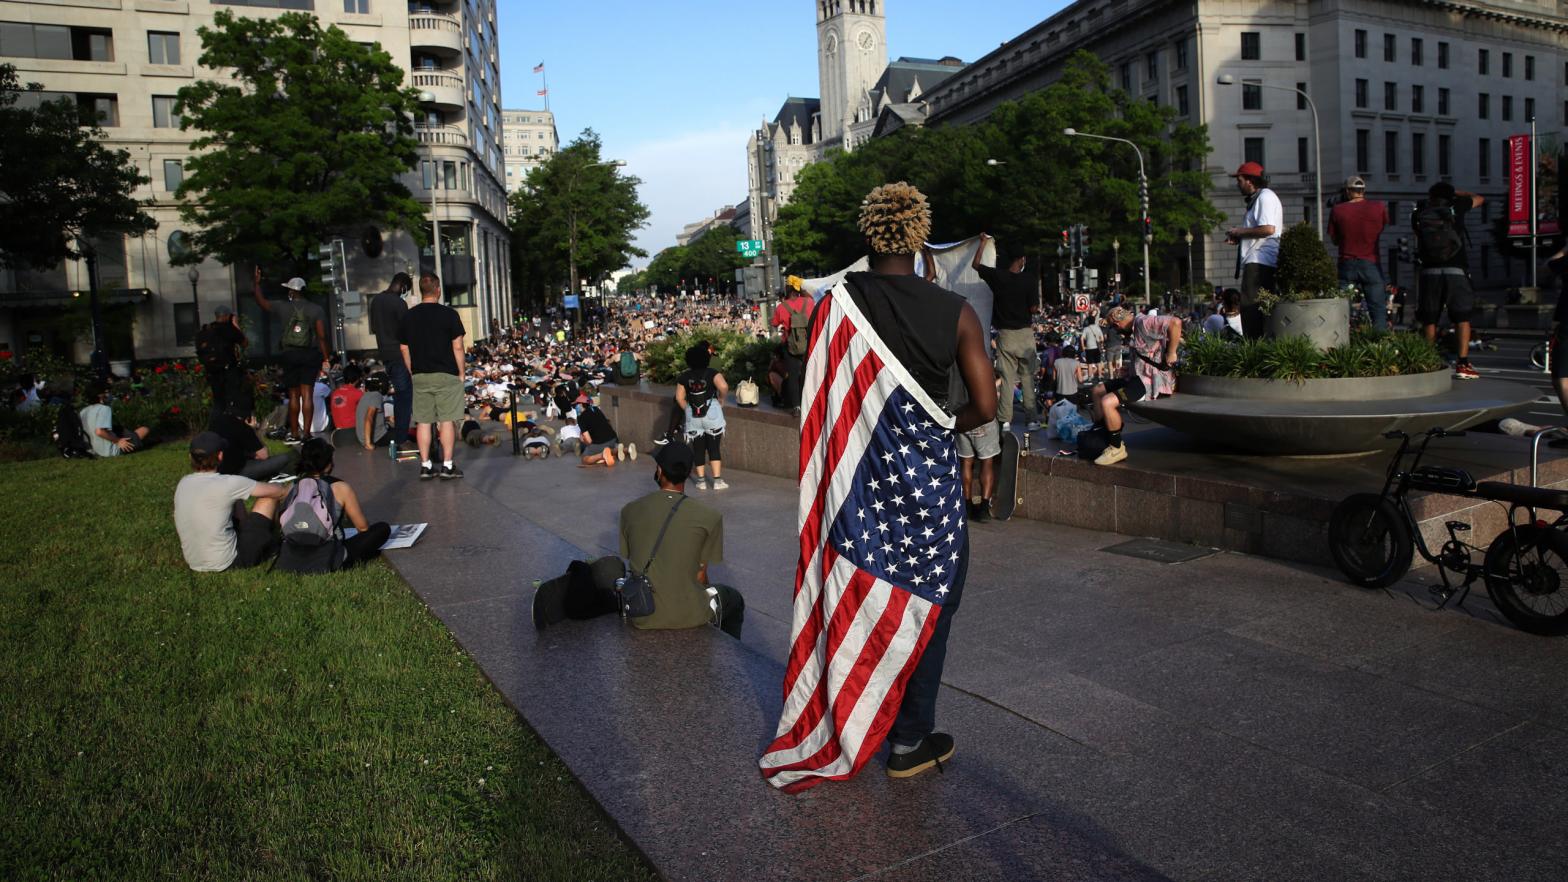 People attending a protest over the police killing of George Floyd on June 3, 2020 in Washington, DC (Photo: Getty Images)